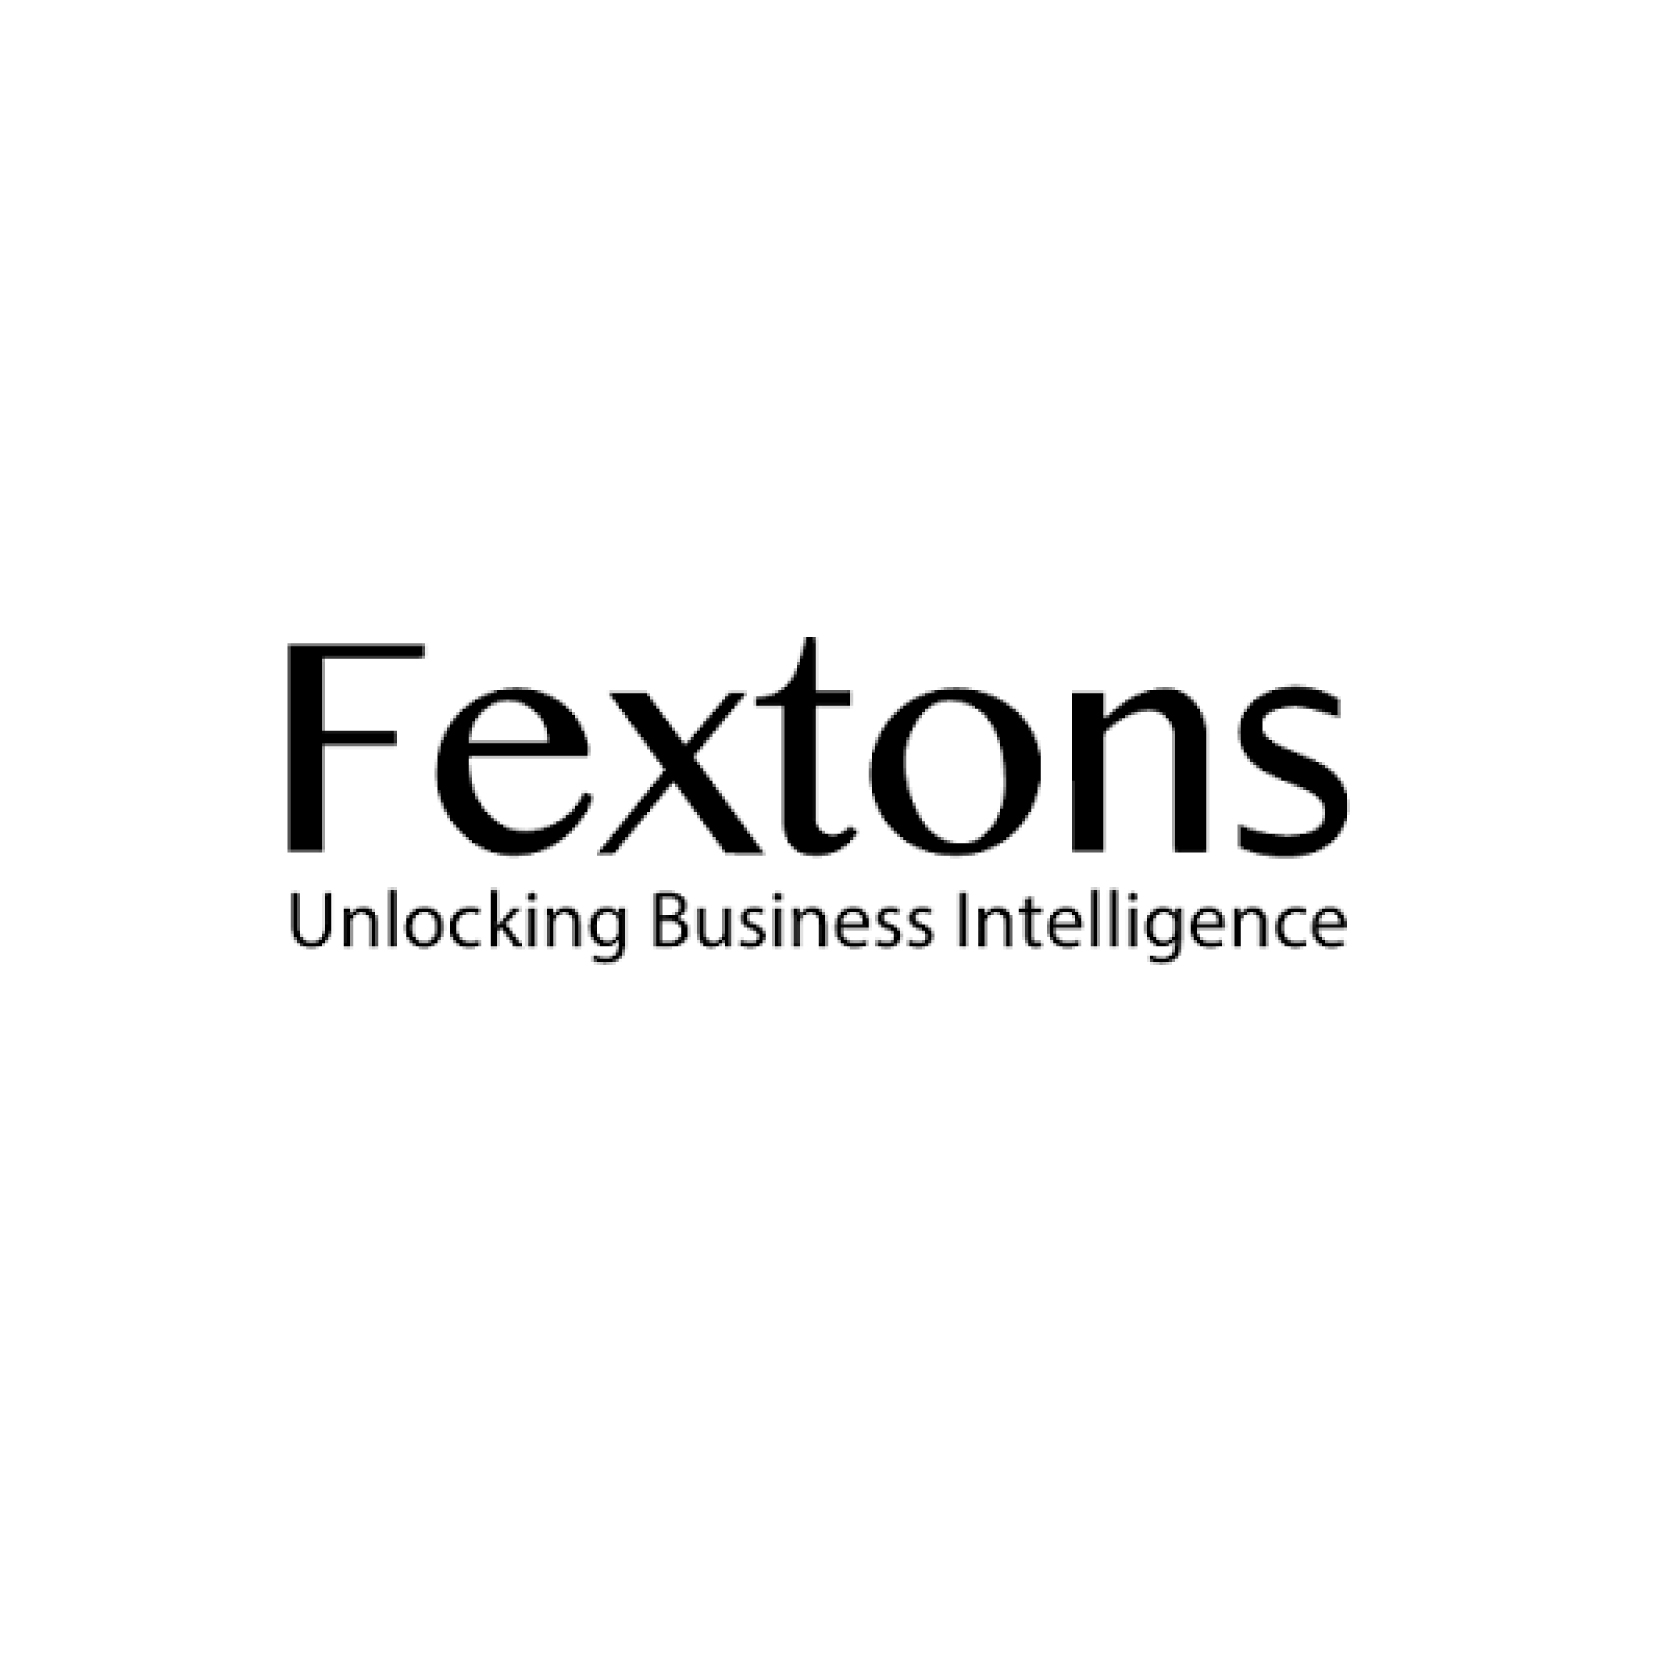 Fextons